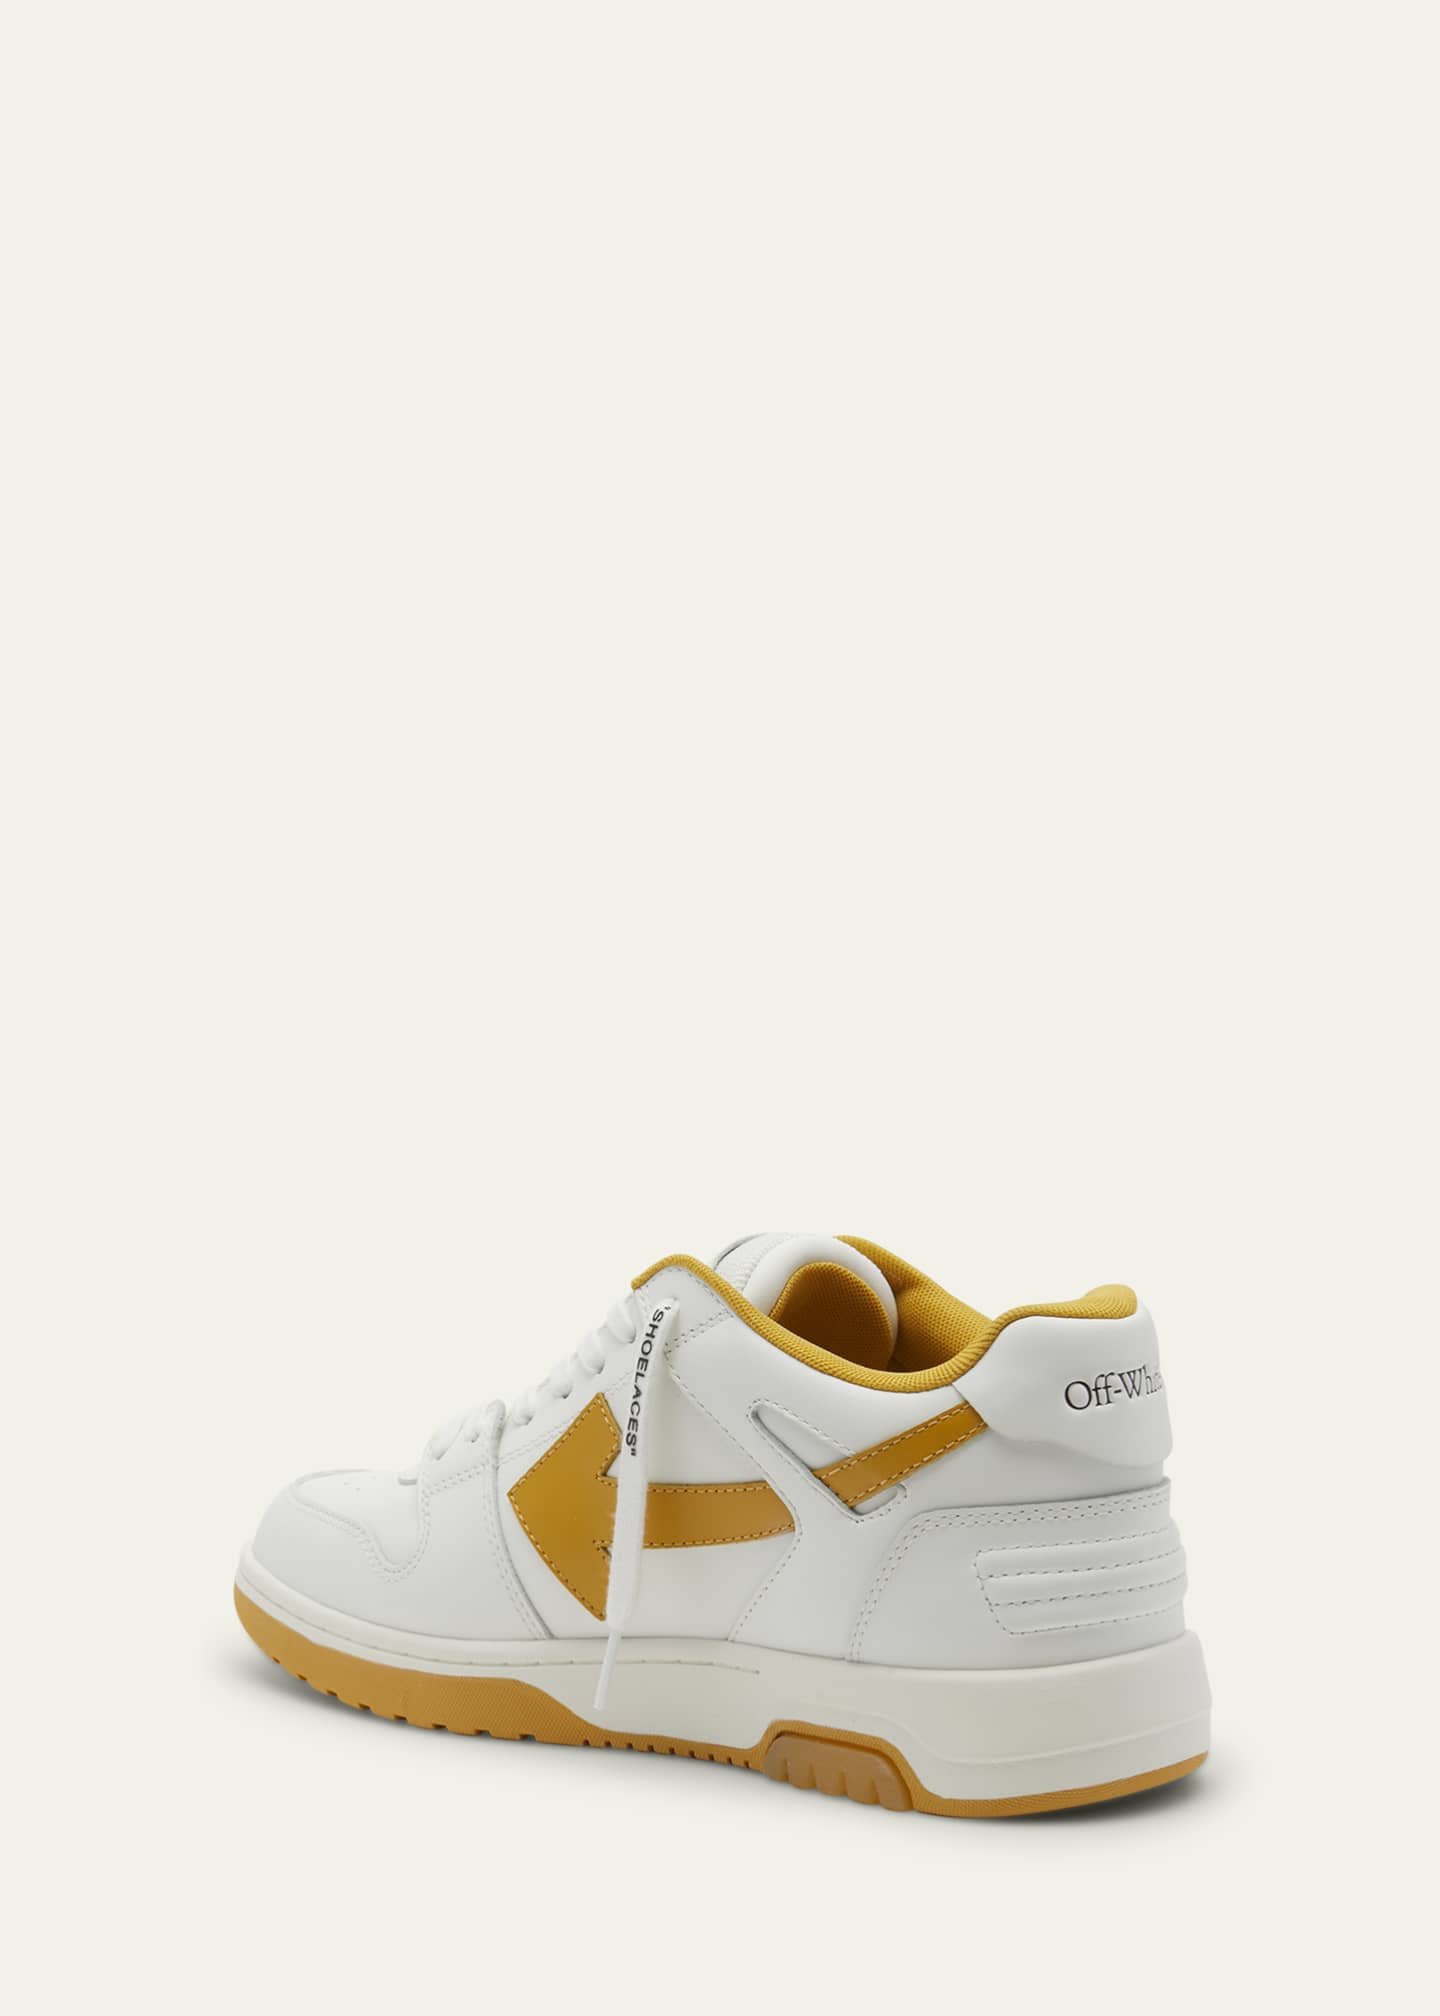 Off-White Out Of Office Ooo Black / Yellow Low Top Sneakers